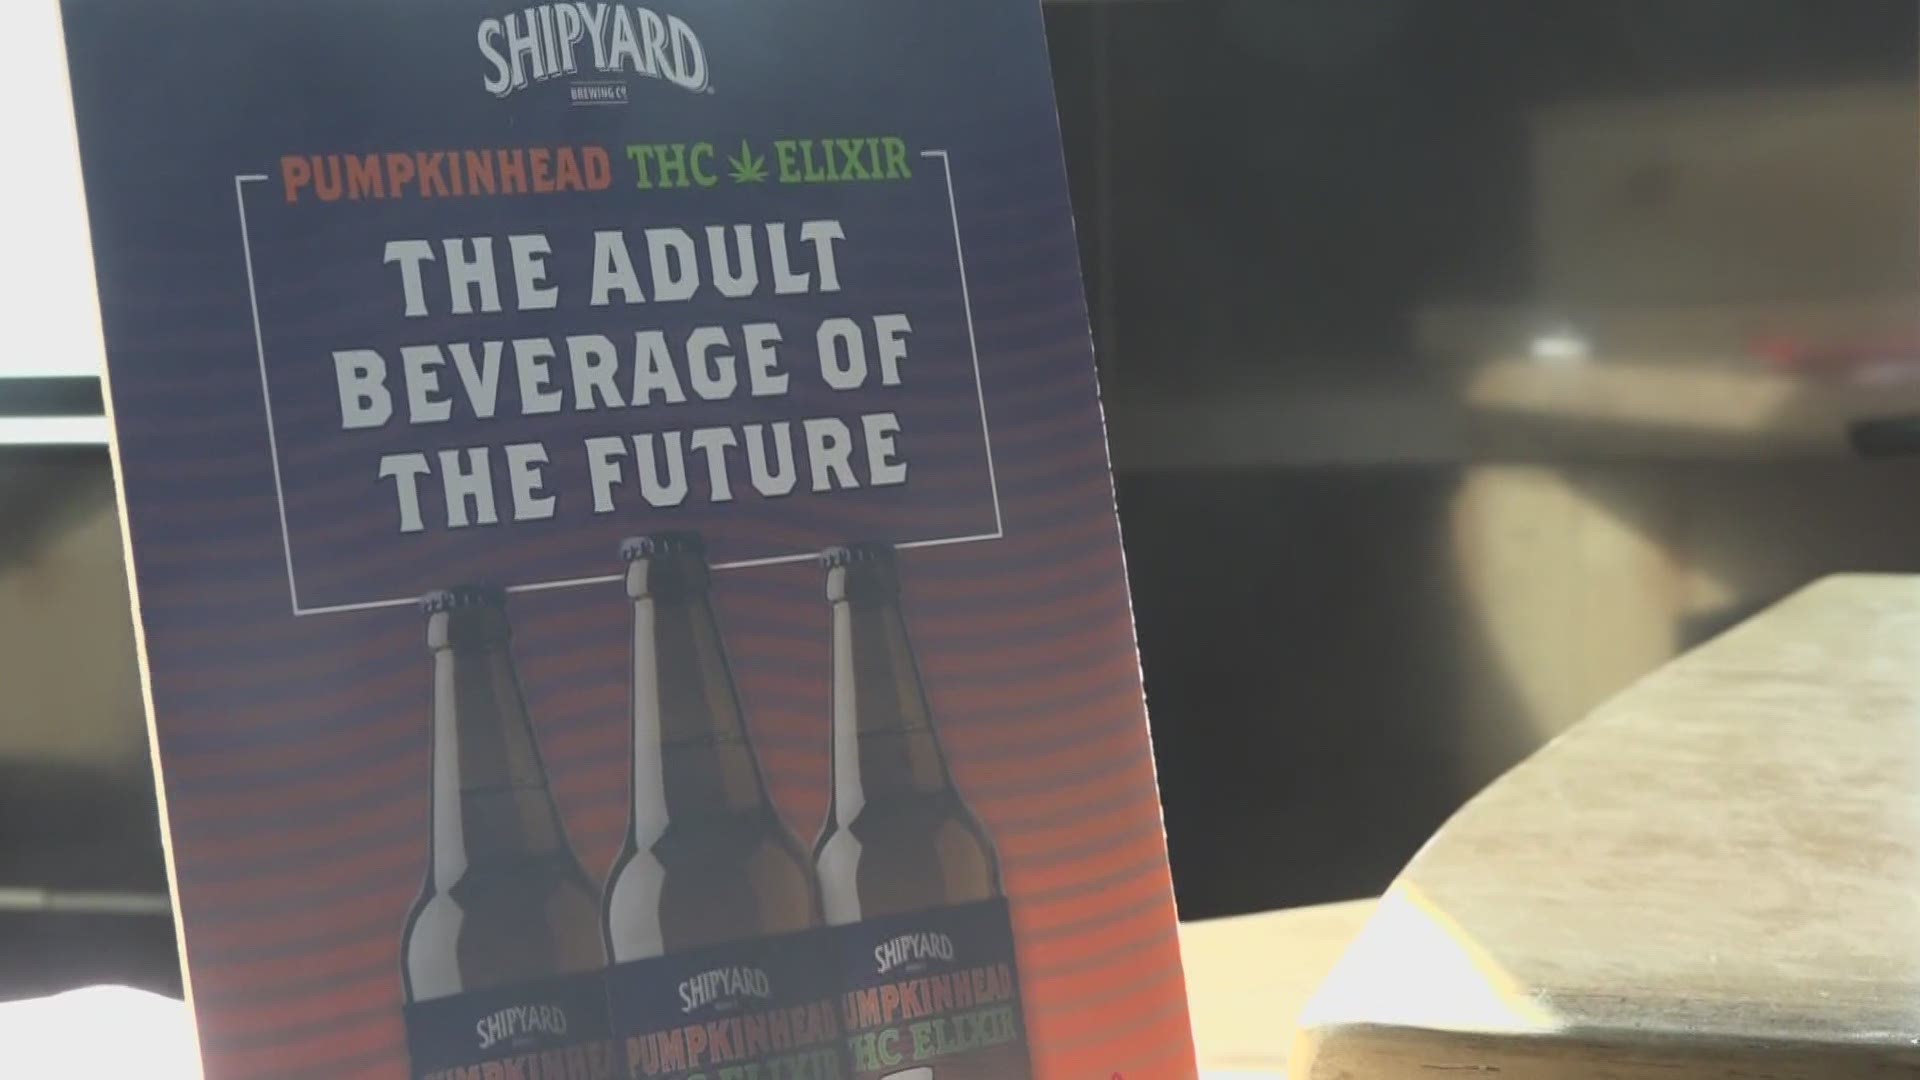 Local brothers Greg & Matt Hawes have developed the drink, and are working with Shipyard Brewing to produce the Pumkpinhead 'THC Elixir'.